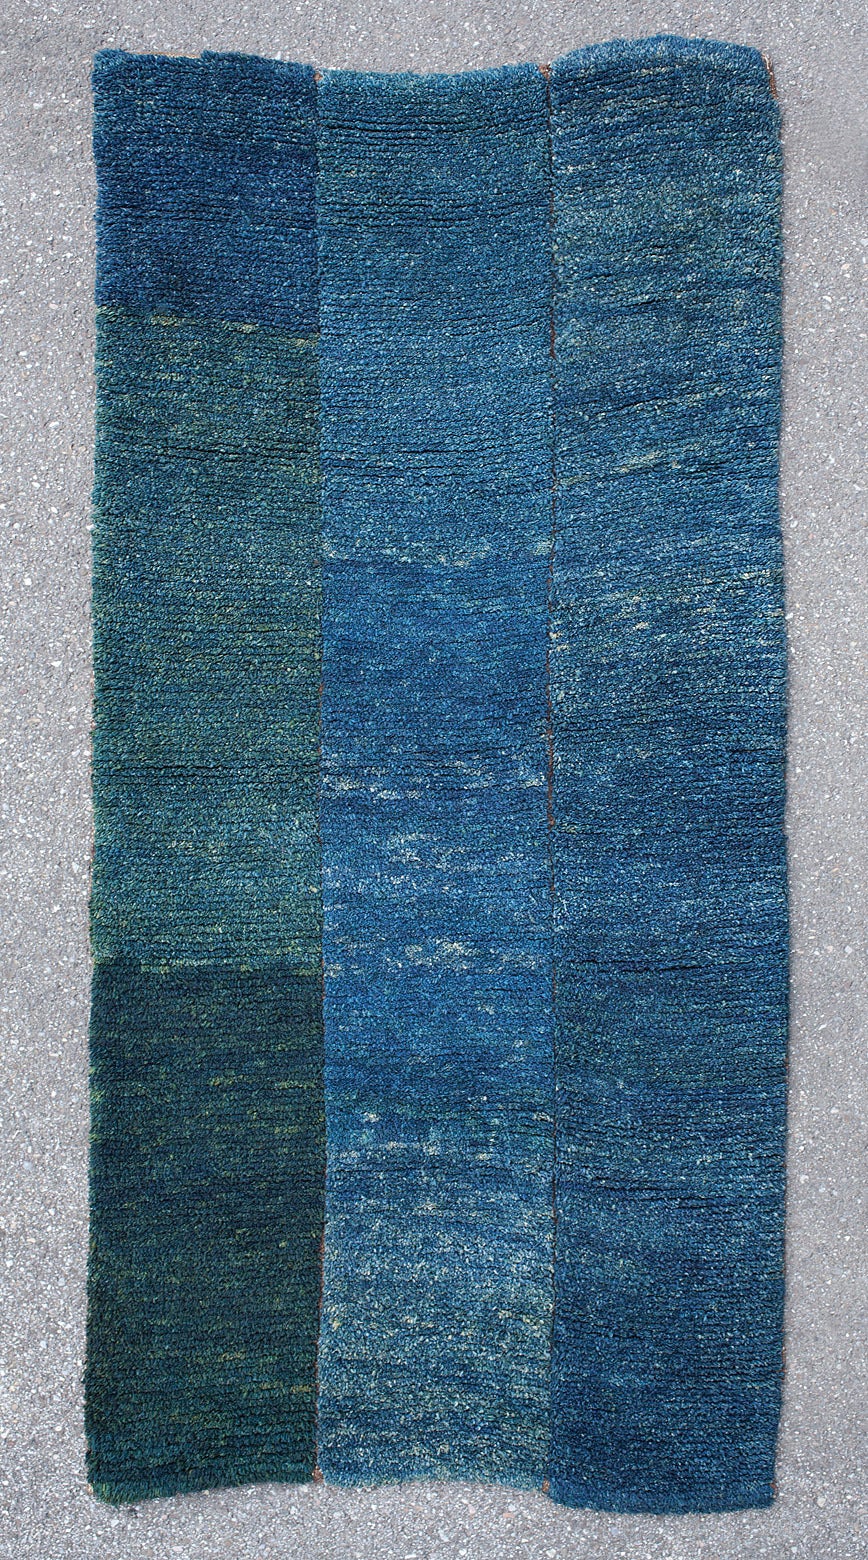 This antique geometric Tibetan Tsukdruk has a reduced Minimalist design. 

Made in three narrow strips joined together, this rug’s unique design is created by the vivid abrash, the color variations ranging from light blue to dark green. The